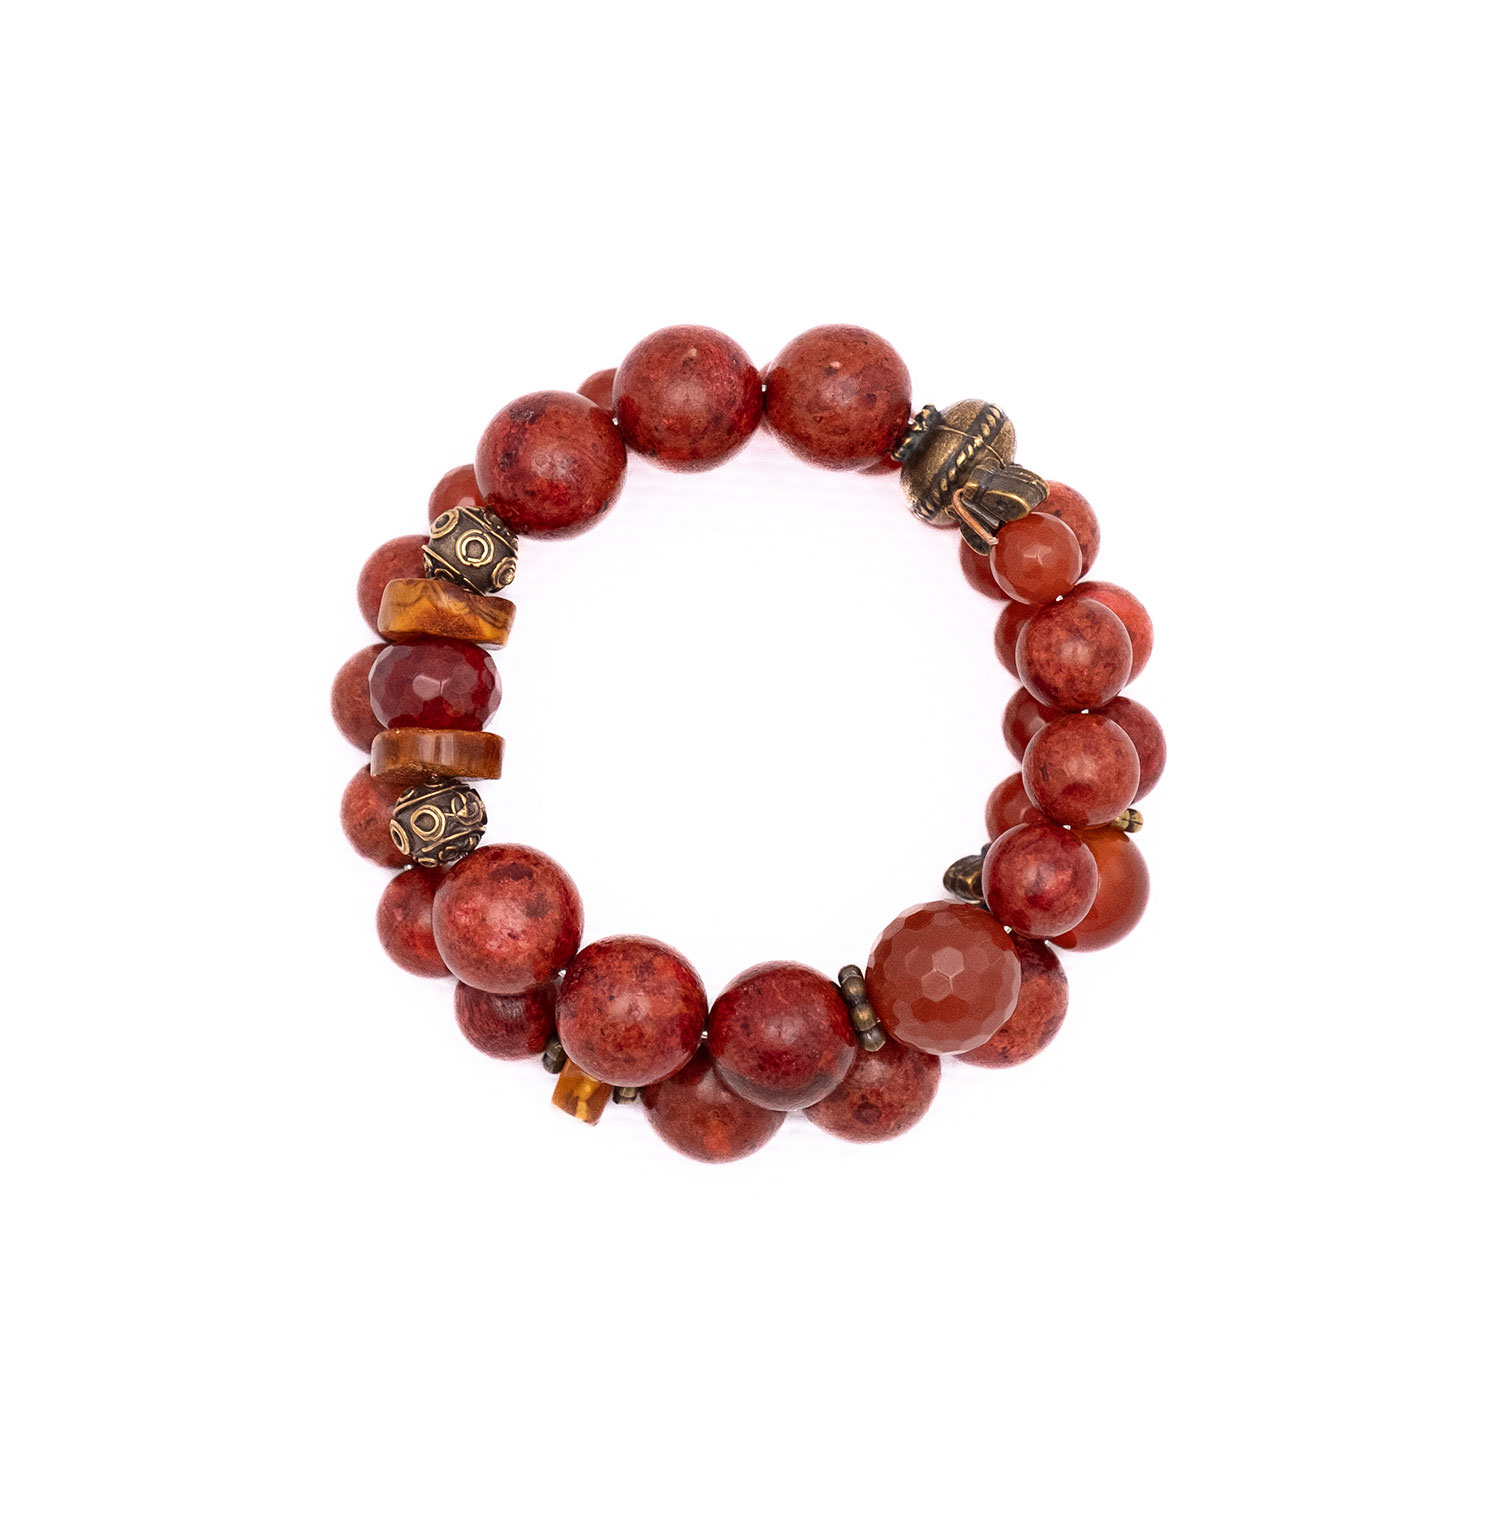 Bracelet made of processed red coral, agates, amber from Baltic sea and tin.